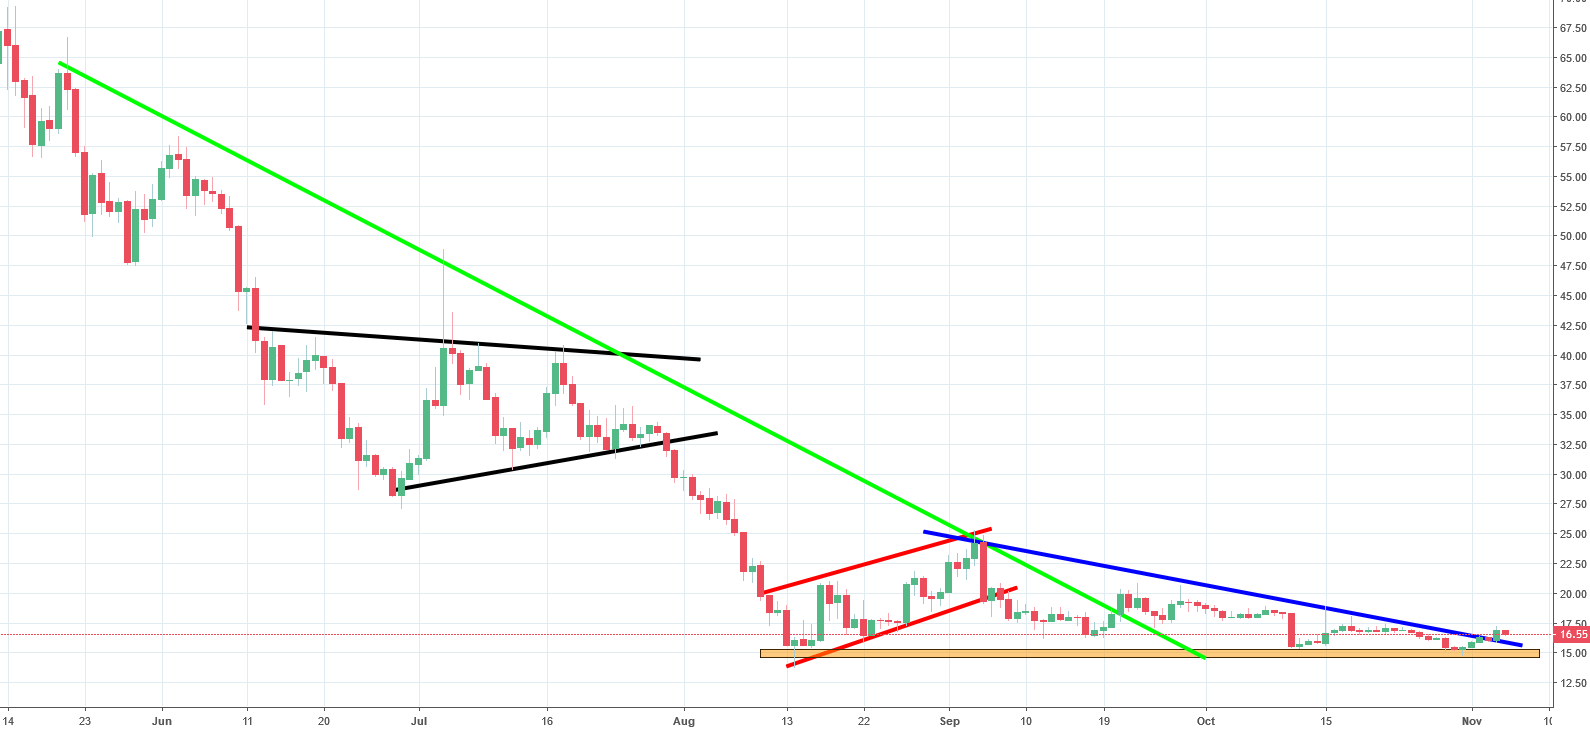 NEO Analysis - resistance breached and more growth expected